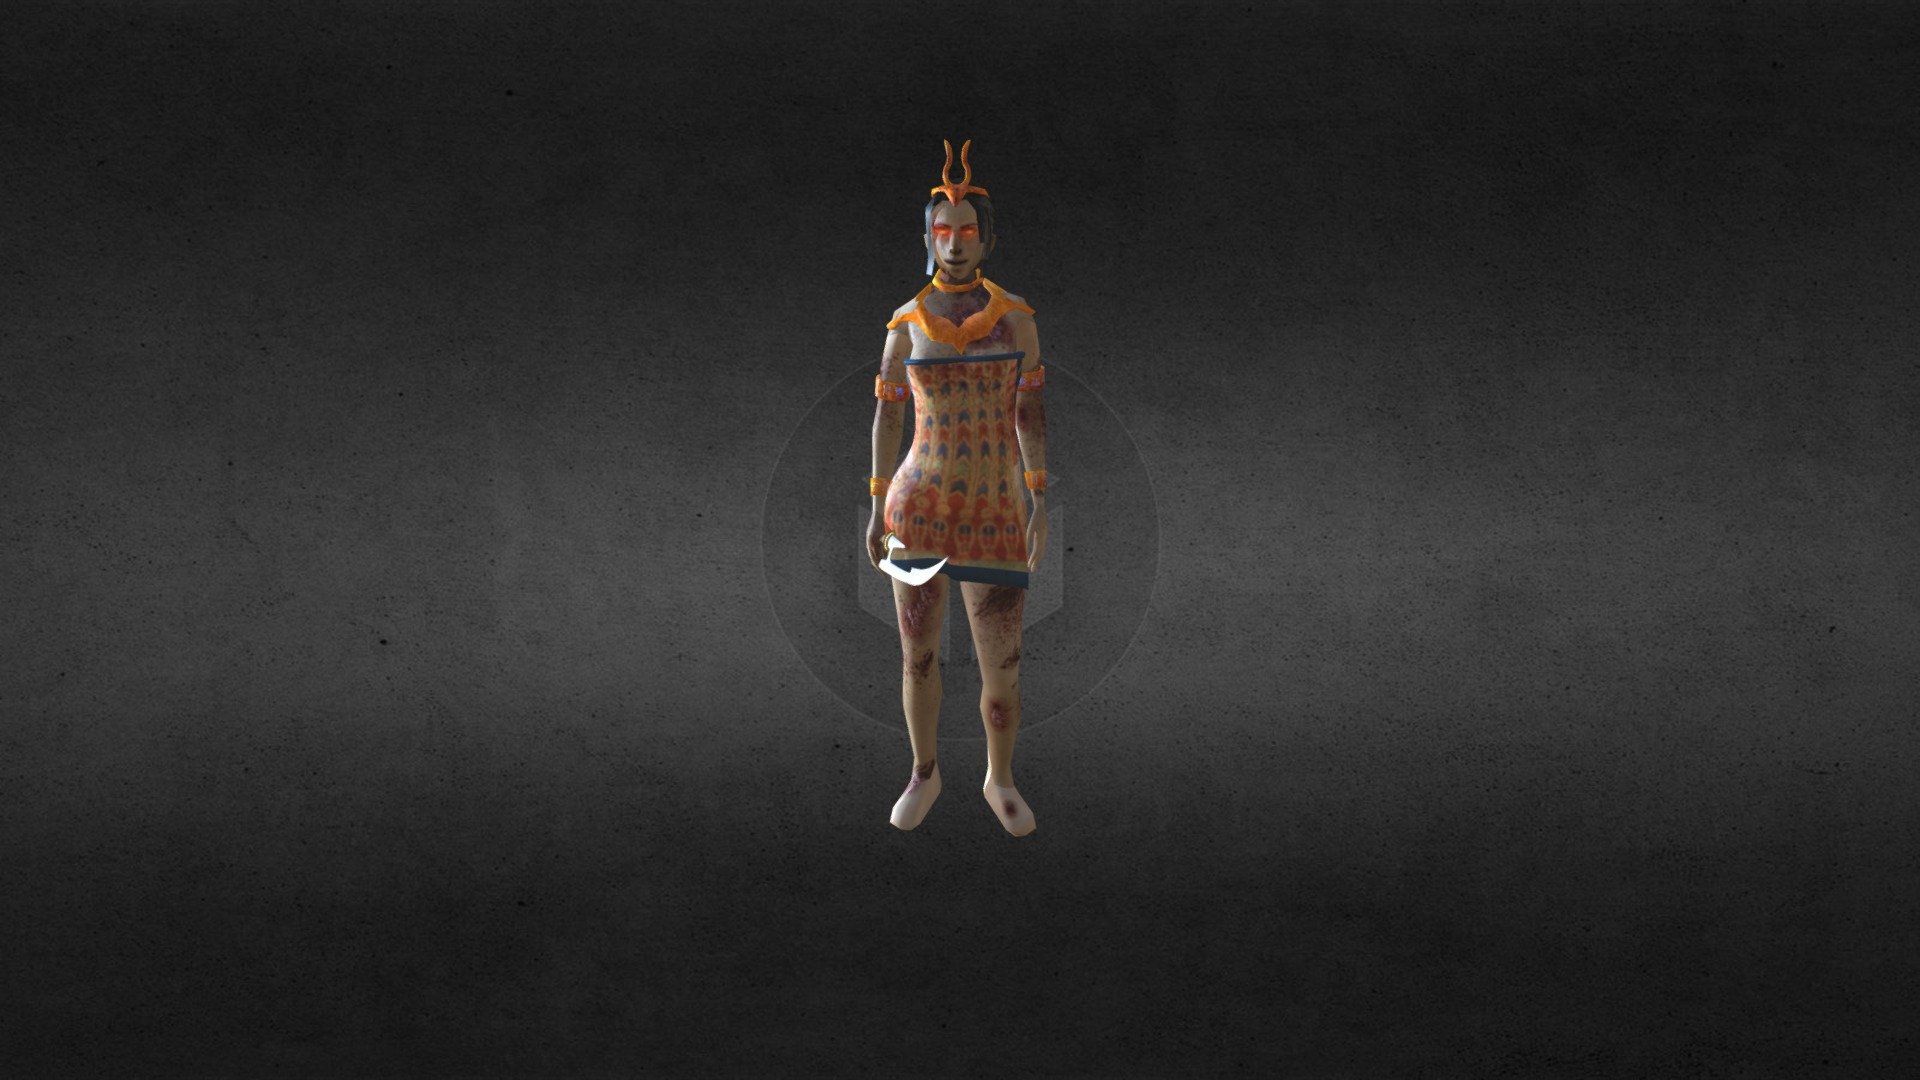 fully rigged and animated Entity - Queen of Death - low poly

https://www.youtube.com/watch?v=zQ8jCTFL9dw
https://7daystodie.com/forums/showthread.php?109732-Curse-of-Anubis-Prefab-The-Sphinx - Queen of Damned - 3D model by Joel (@JoelKilb) 3d model